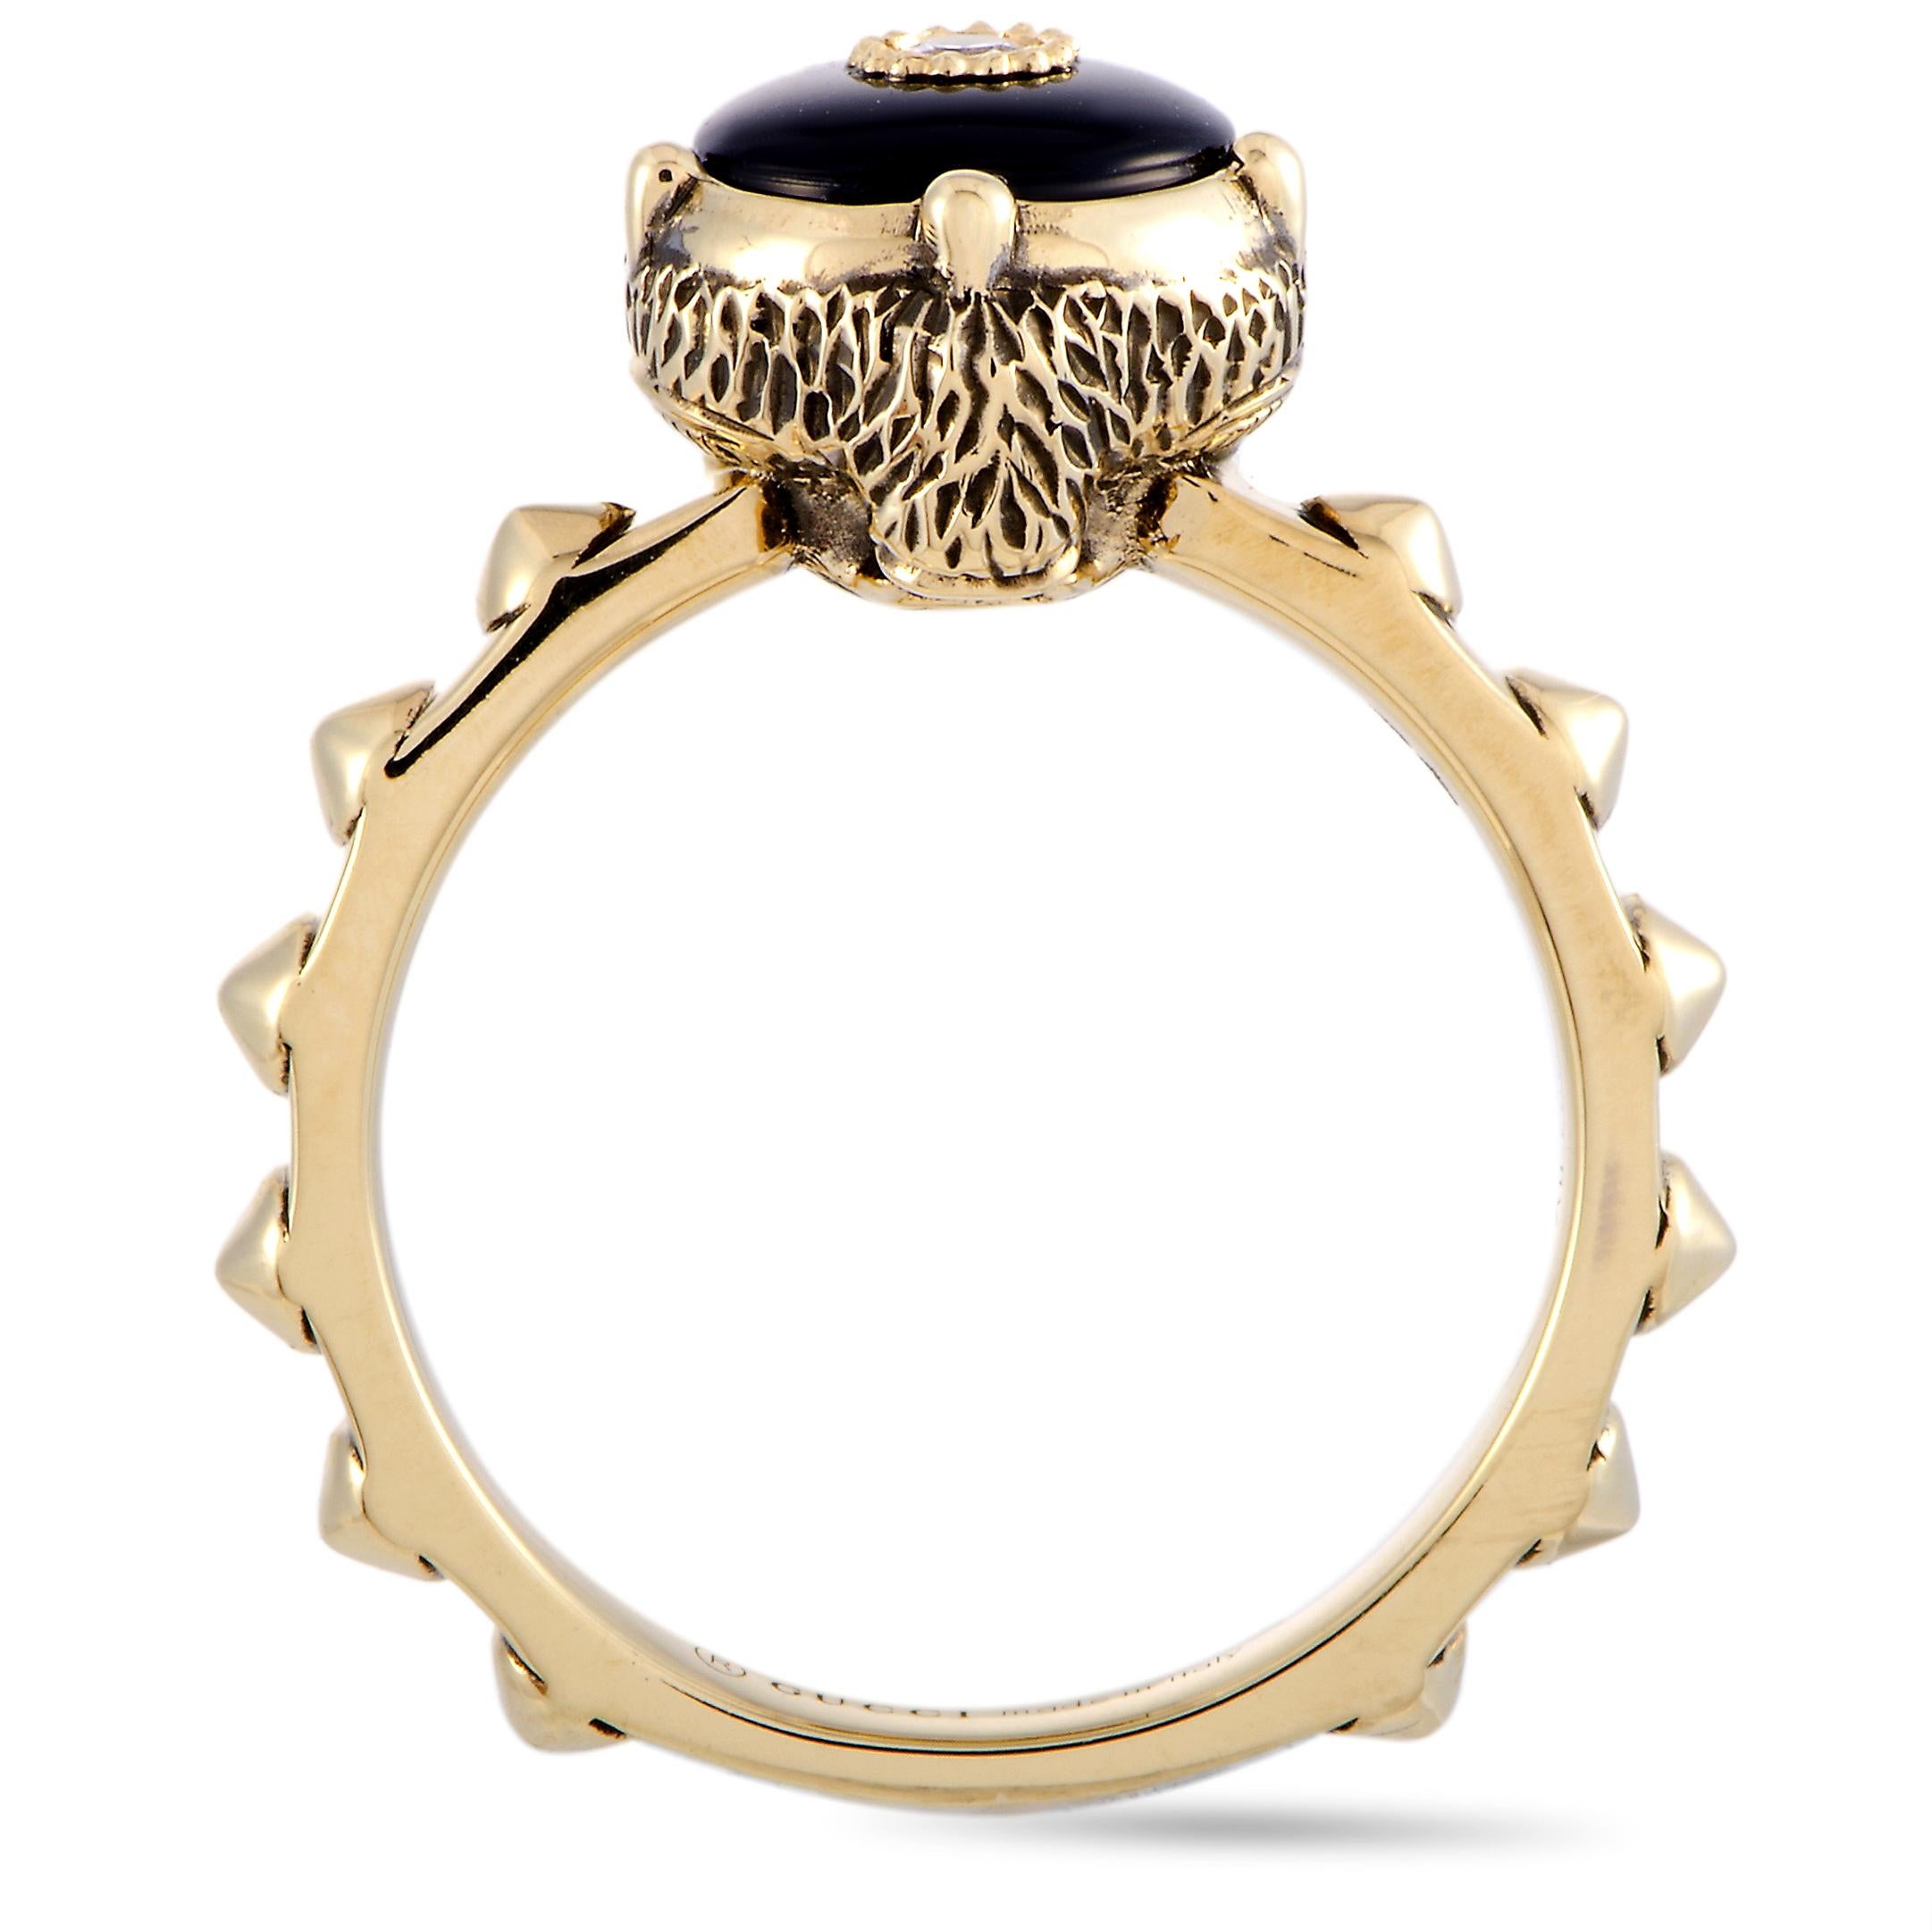 The “Le Marché des Merveilles” ring by Gucci is crafted from 18K yellow gold and set with an onyx and three diamond stones. The onyx weighs approximately 1.07 carats and the diamonds boast GH color and VVS clarity and amount to approximately 0.05